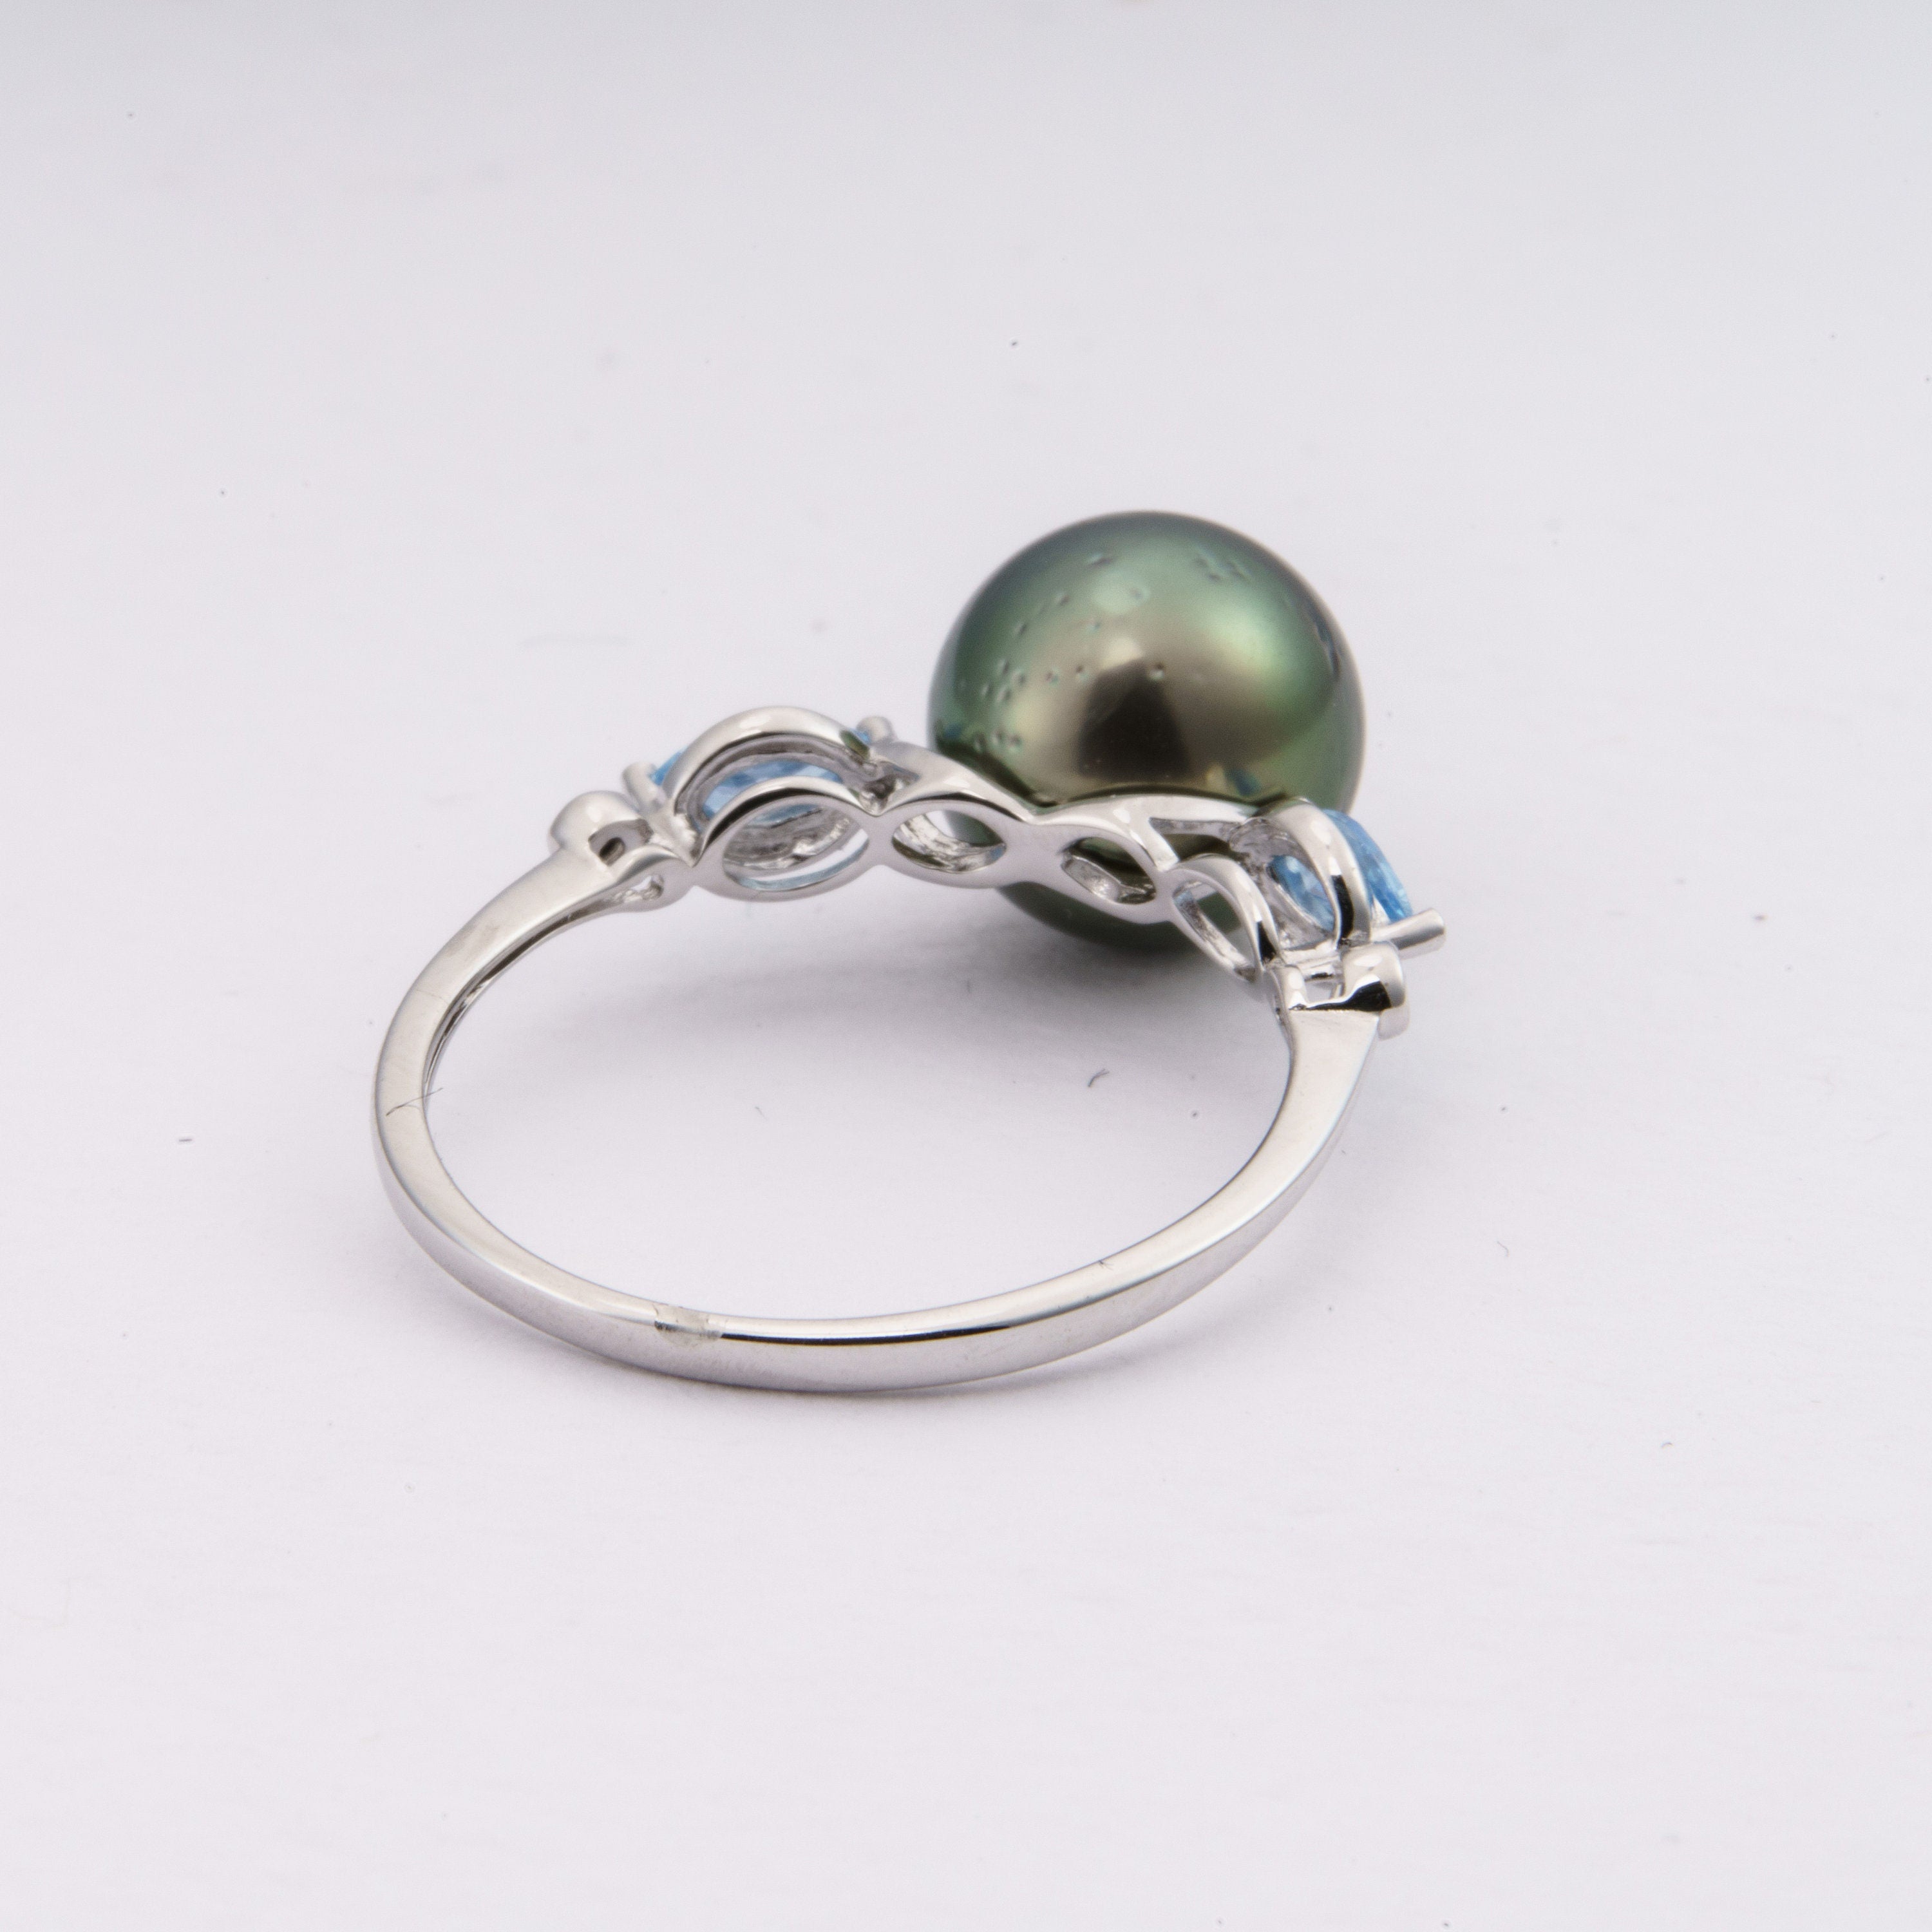 9.5mm tahitian pearl ring size 7.5us 925 sterling silver sea blue cubic zircon